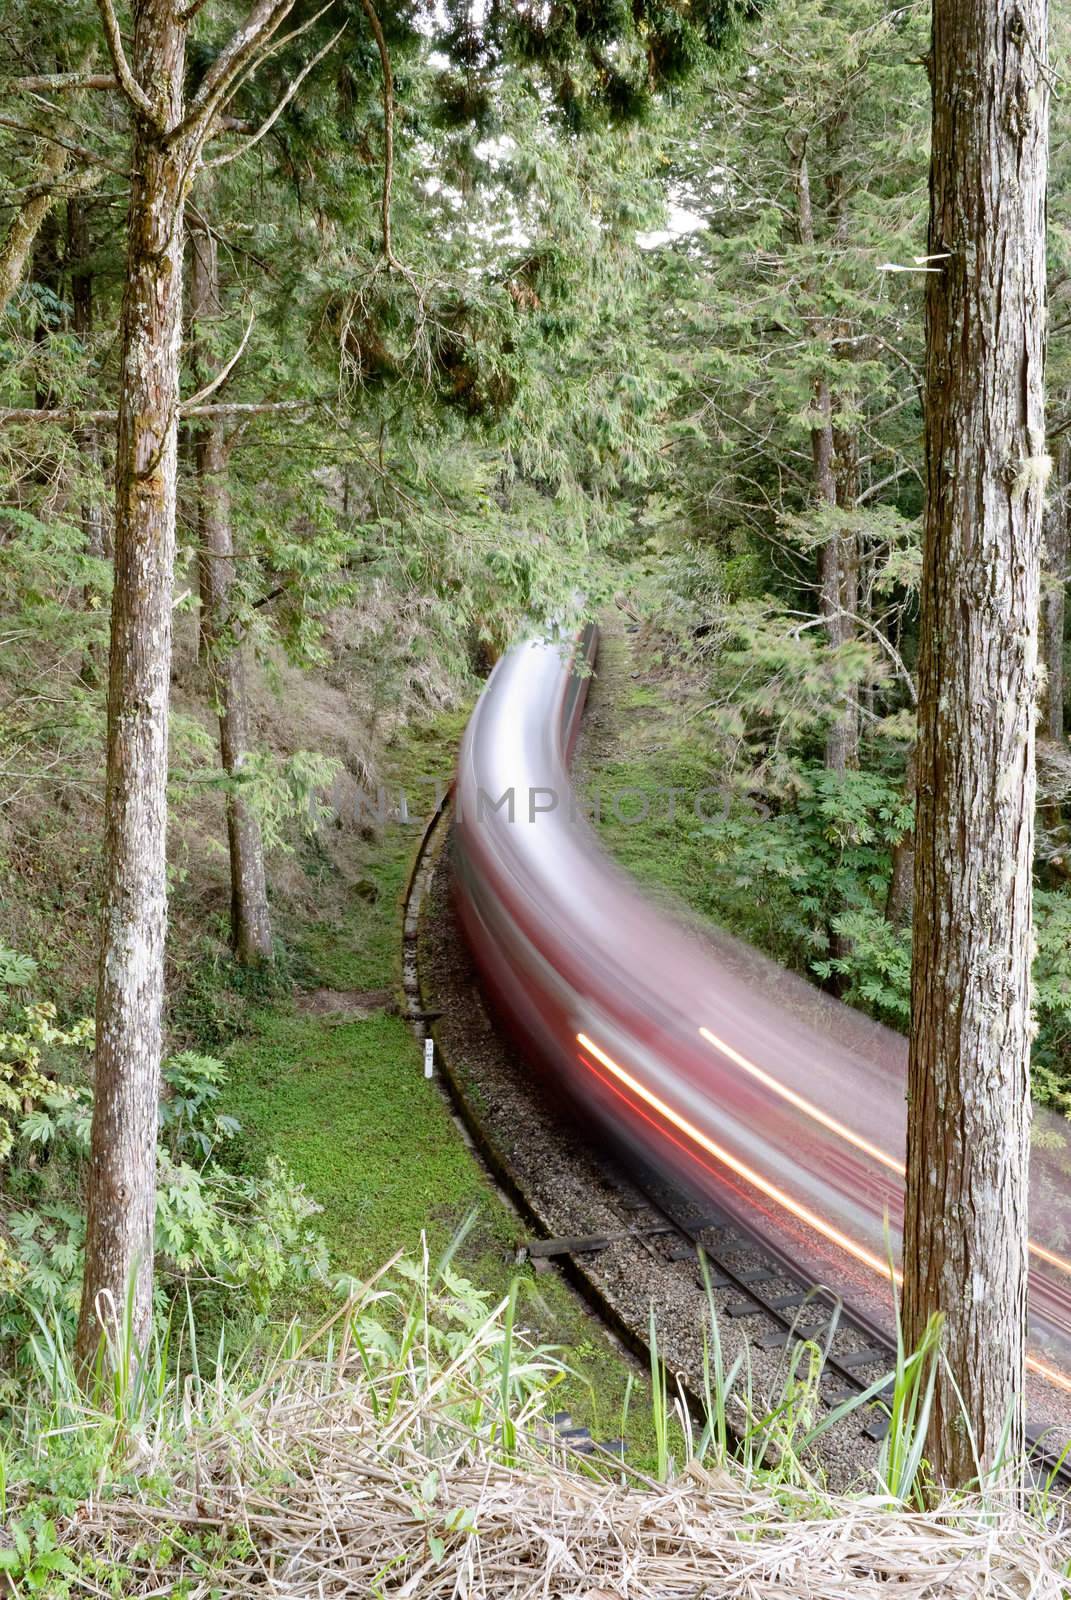 Forest railway with train move blurred in Alishan National Scenic Area, Taiwan, Asia.